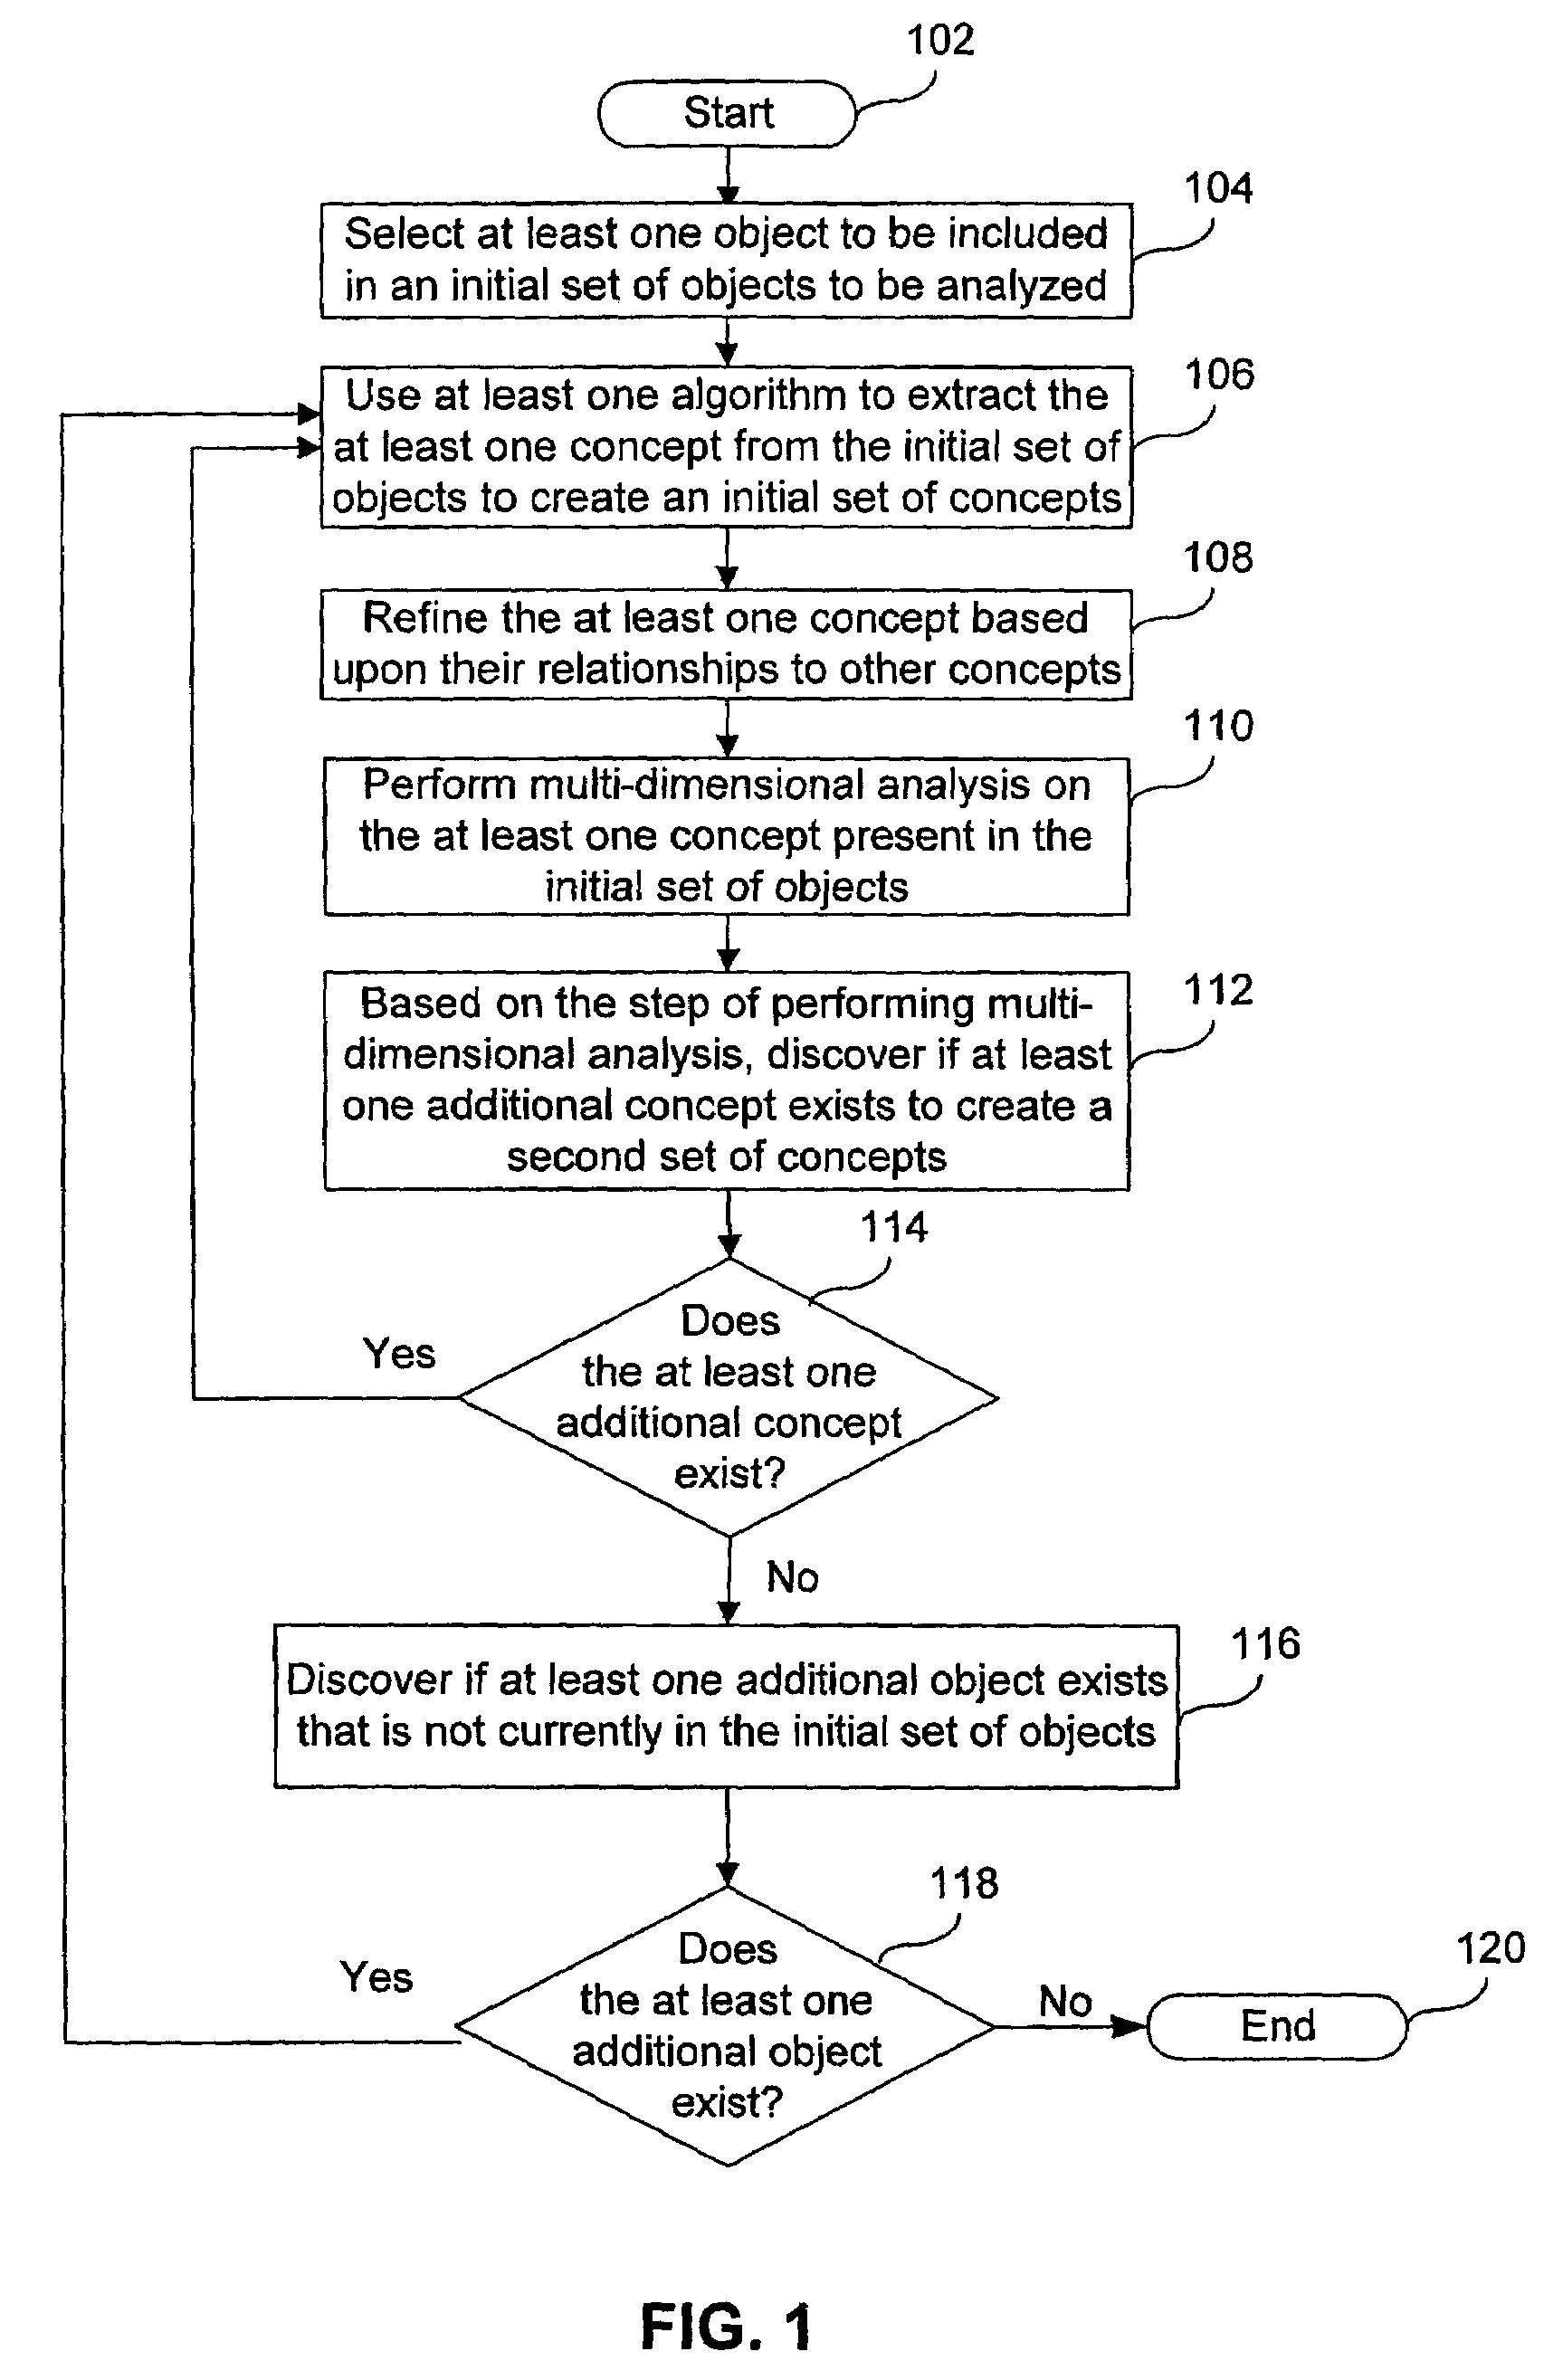 System and method for concept based analysis of unstructured data